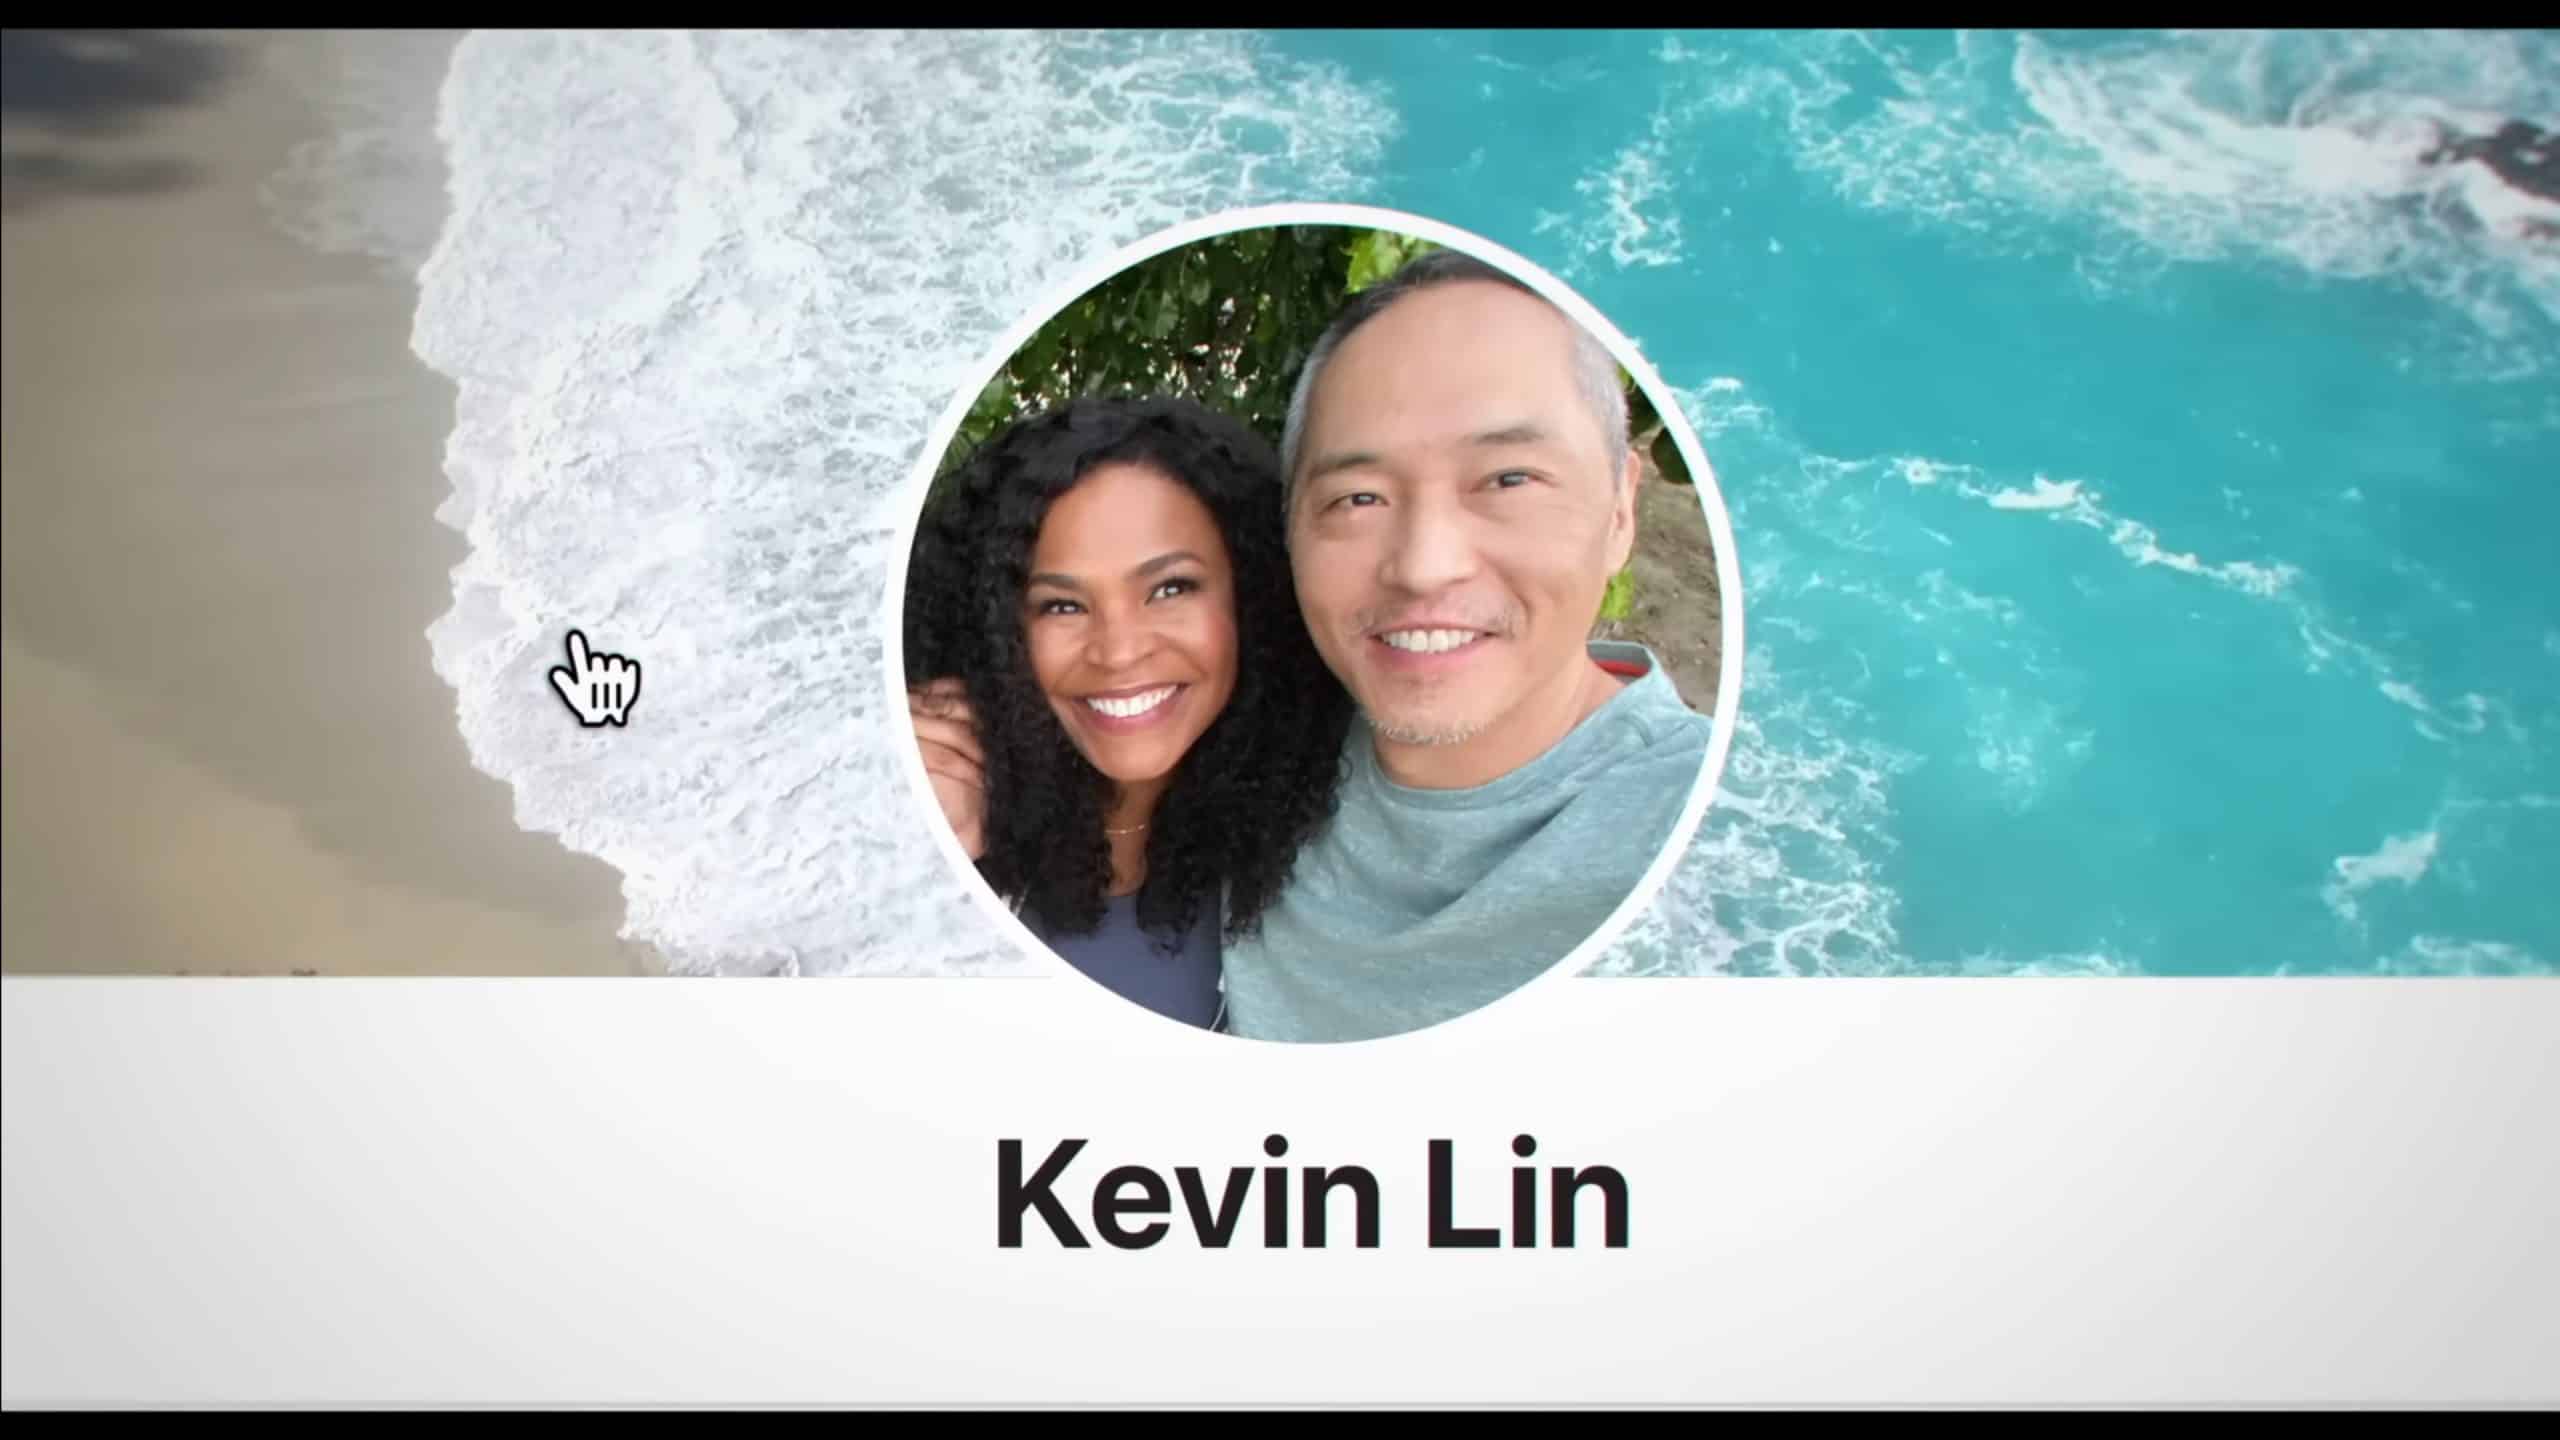 June Allen (Nia Long) and Kevin Lin (Ken Leung) on Kevin's social media page